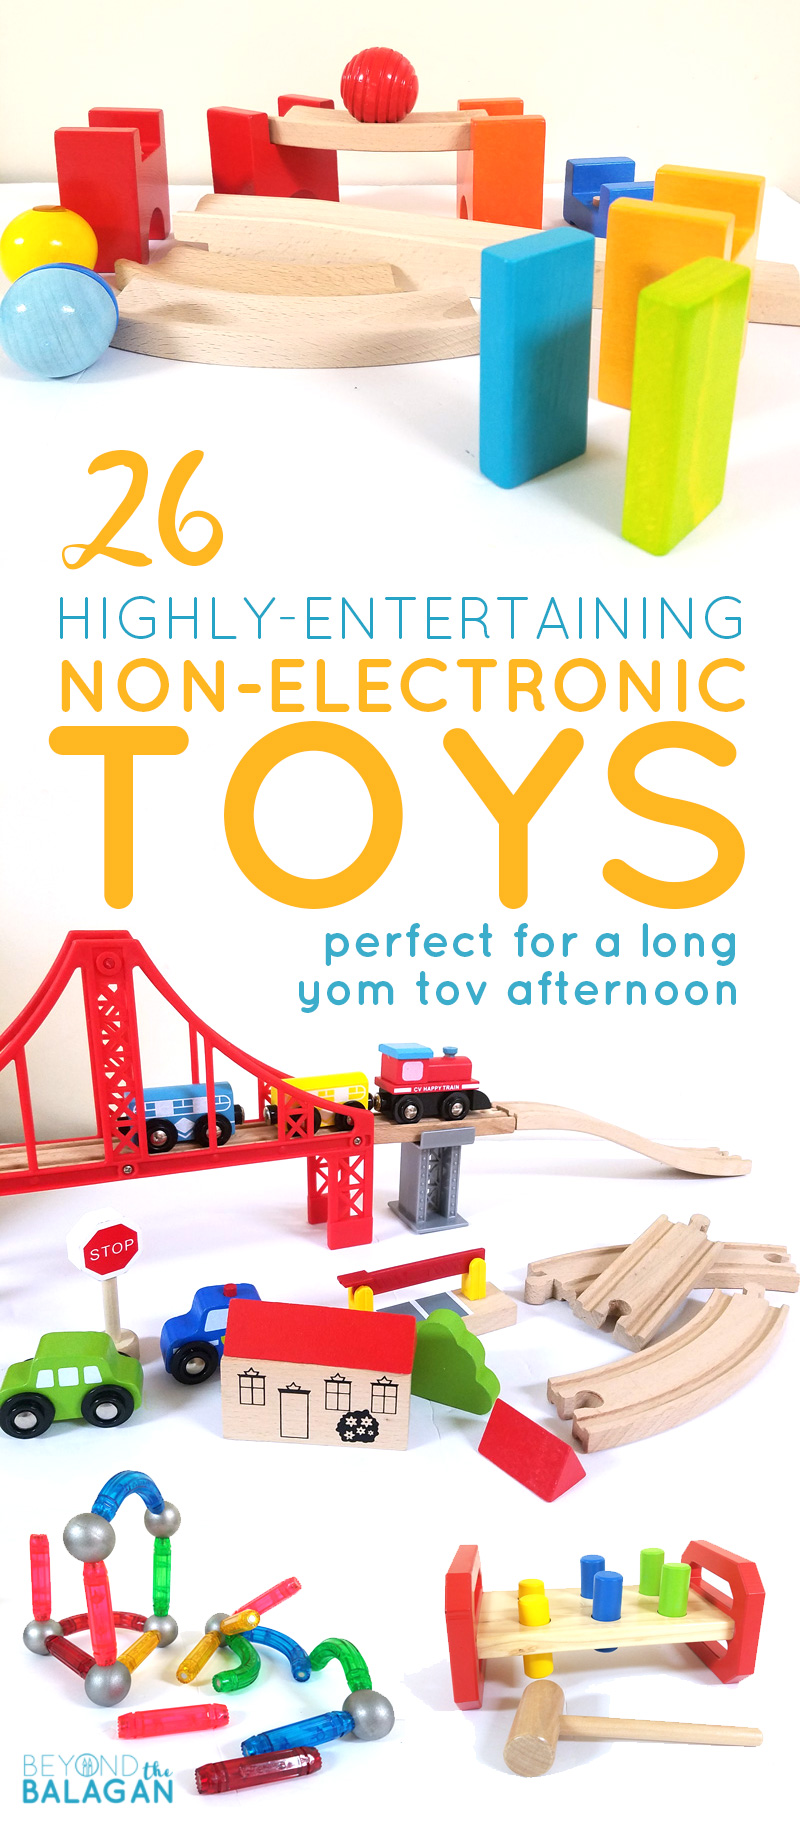 These 26 non-electronic toys and games include ideas for all ages! They are perfect for long yom tov and holiday afternnons, including Rosh Hashanah, sukkot, sukkos, and even yom kippur for little kids. You'll find cool toys appropriate to play on Pesach/Passover and Shavuot too. 